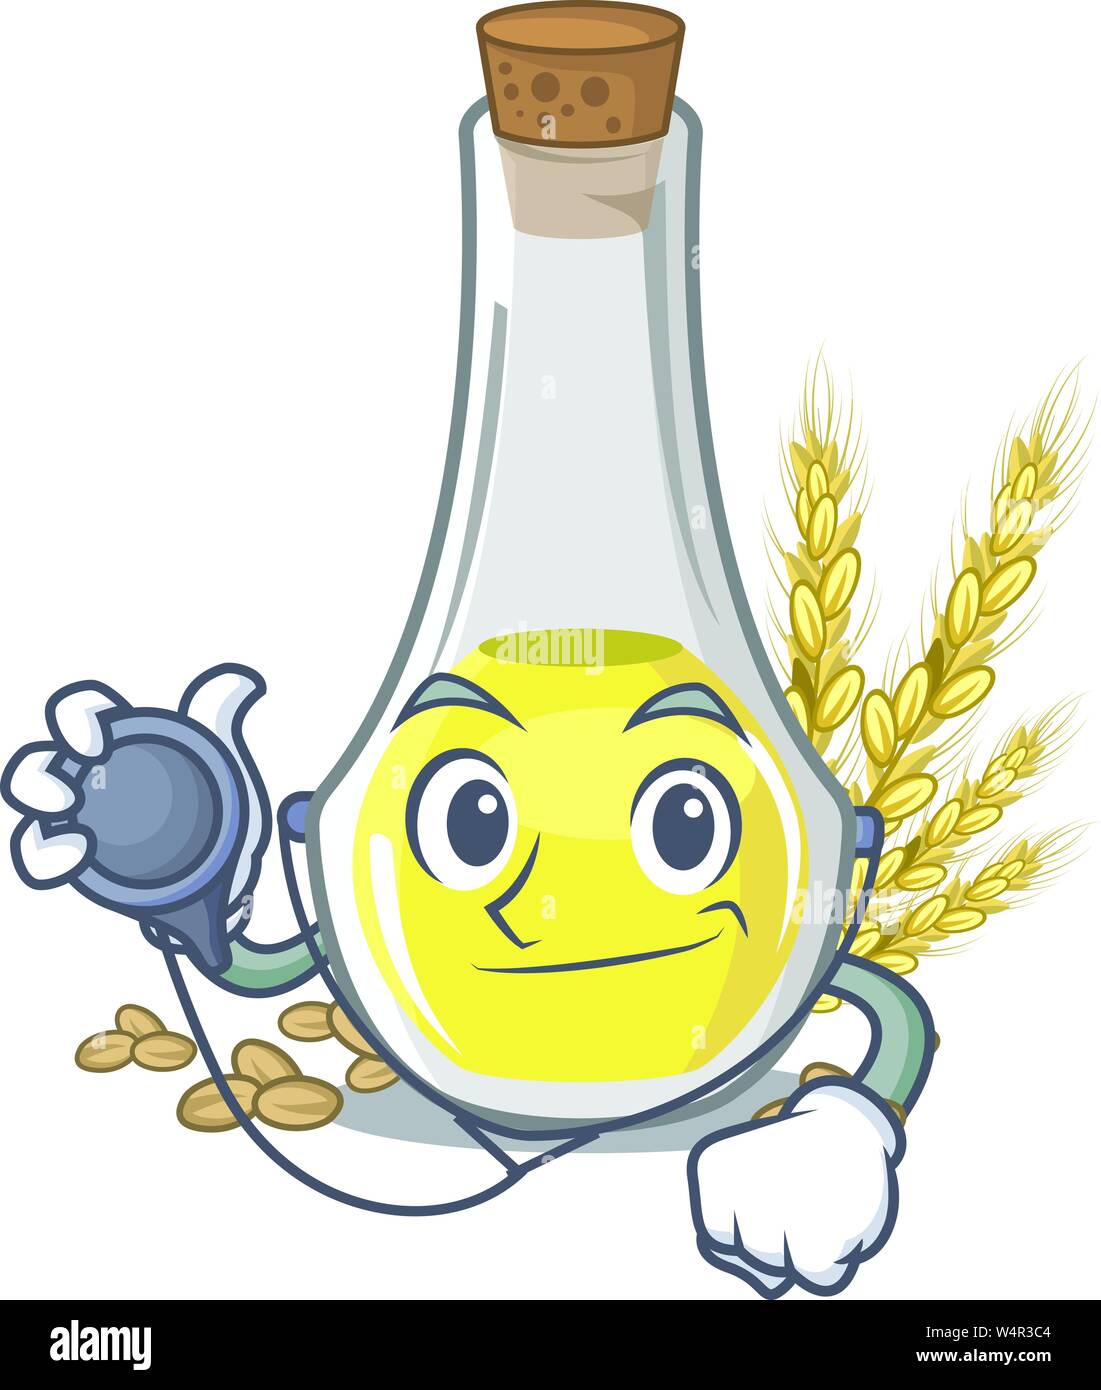 Doctor wheat germ oil with isolated character vector illustration Stock Vector